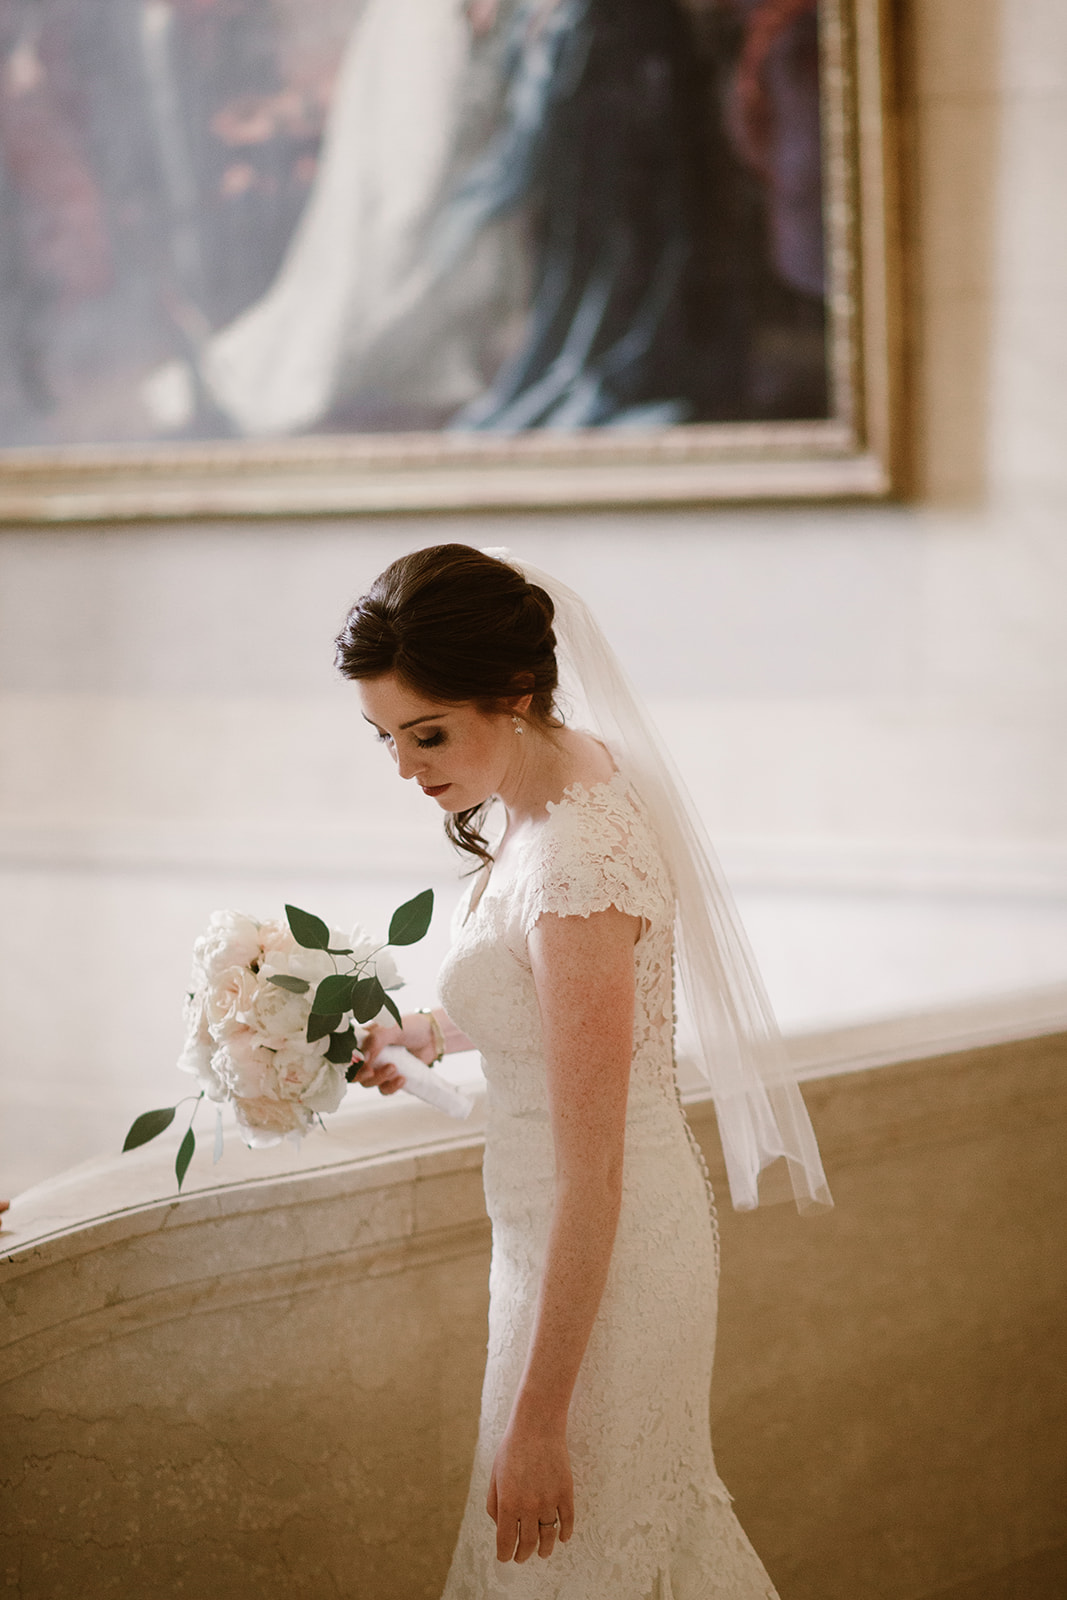  Bride and groom wedding portraits at the National Gallery of Art Museum, Washington D.C. Irish wedding with green and gold accents. Sarah Mattozzi Photography. 